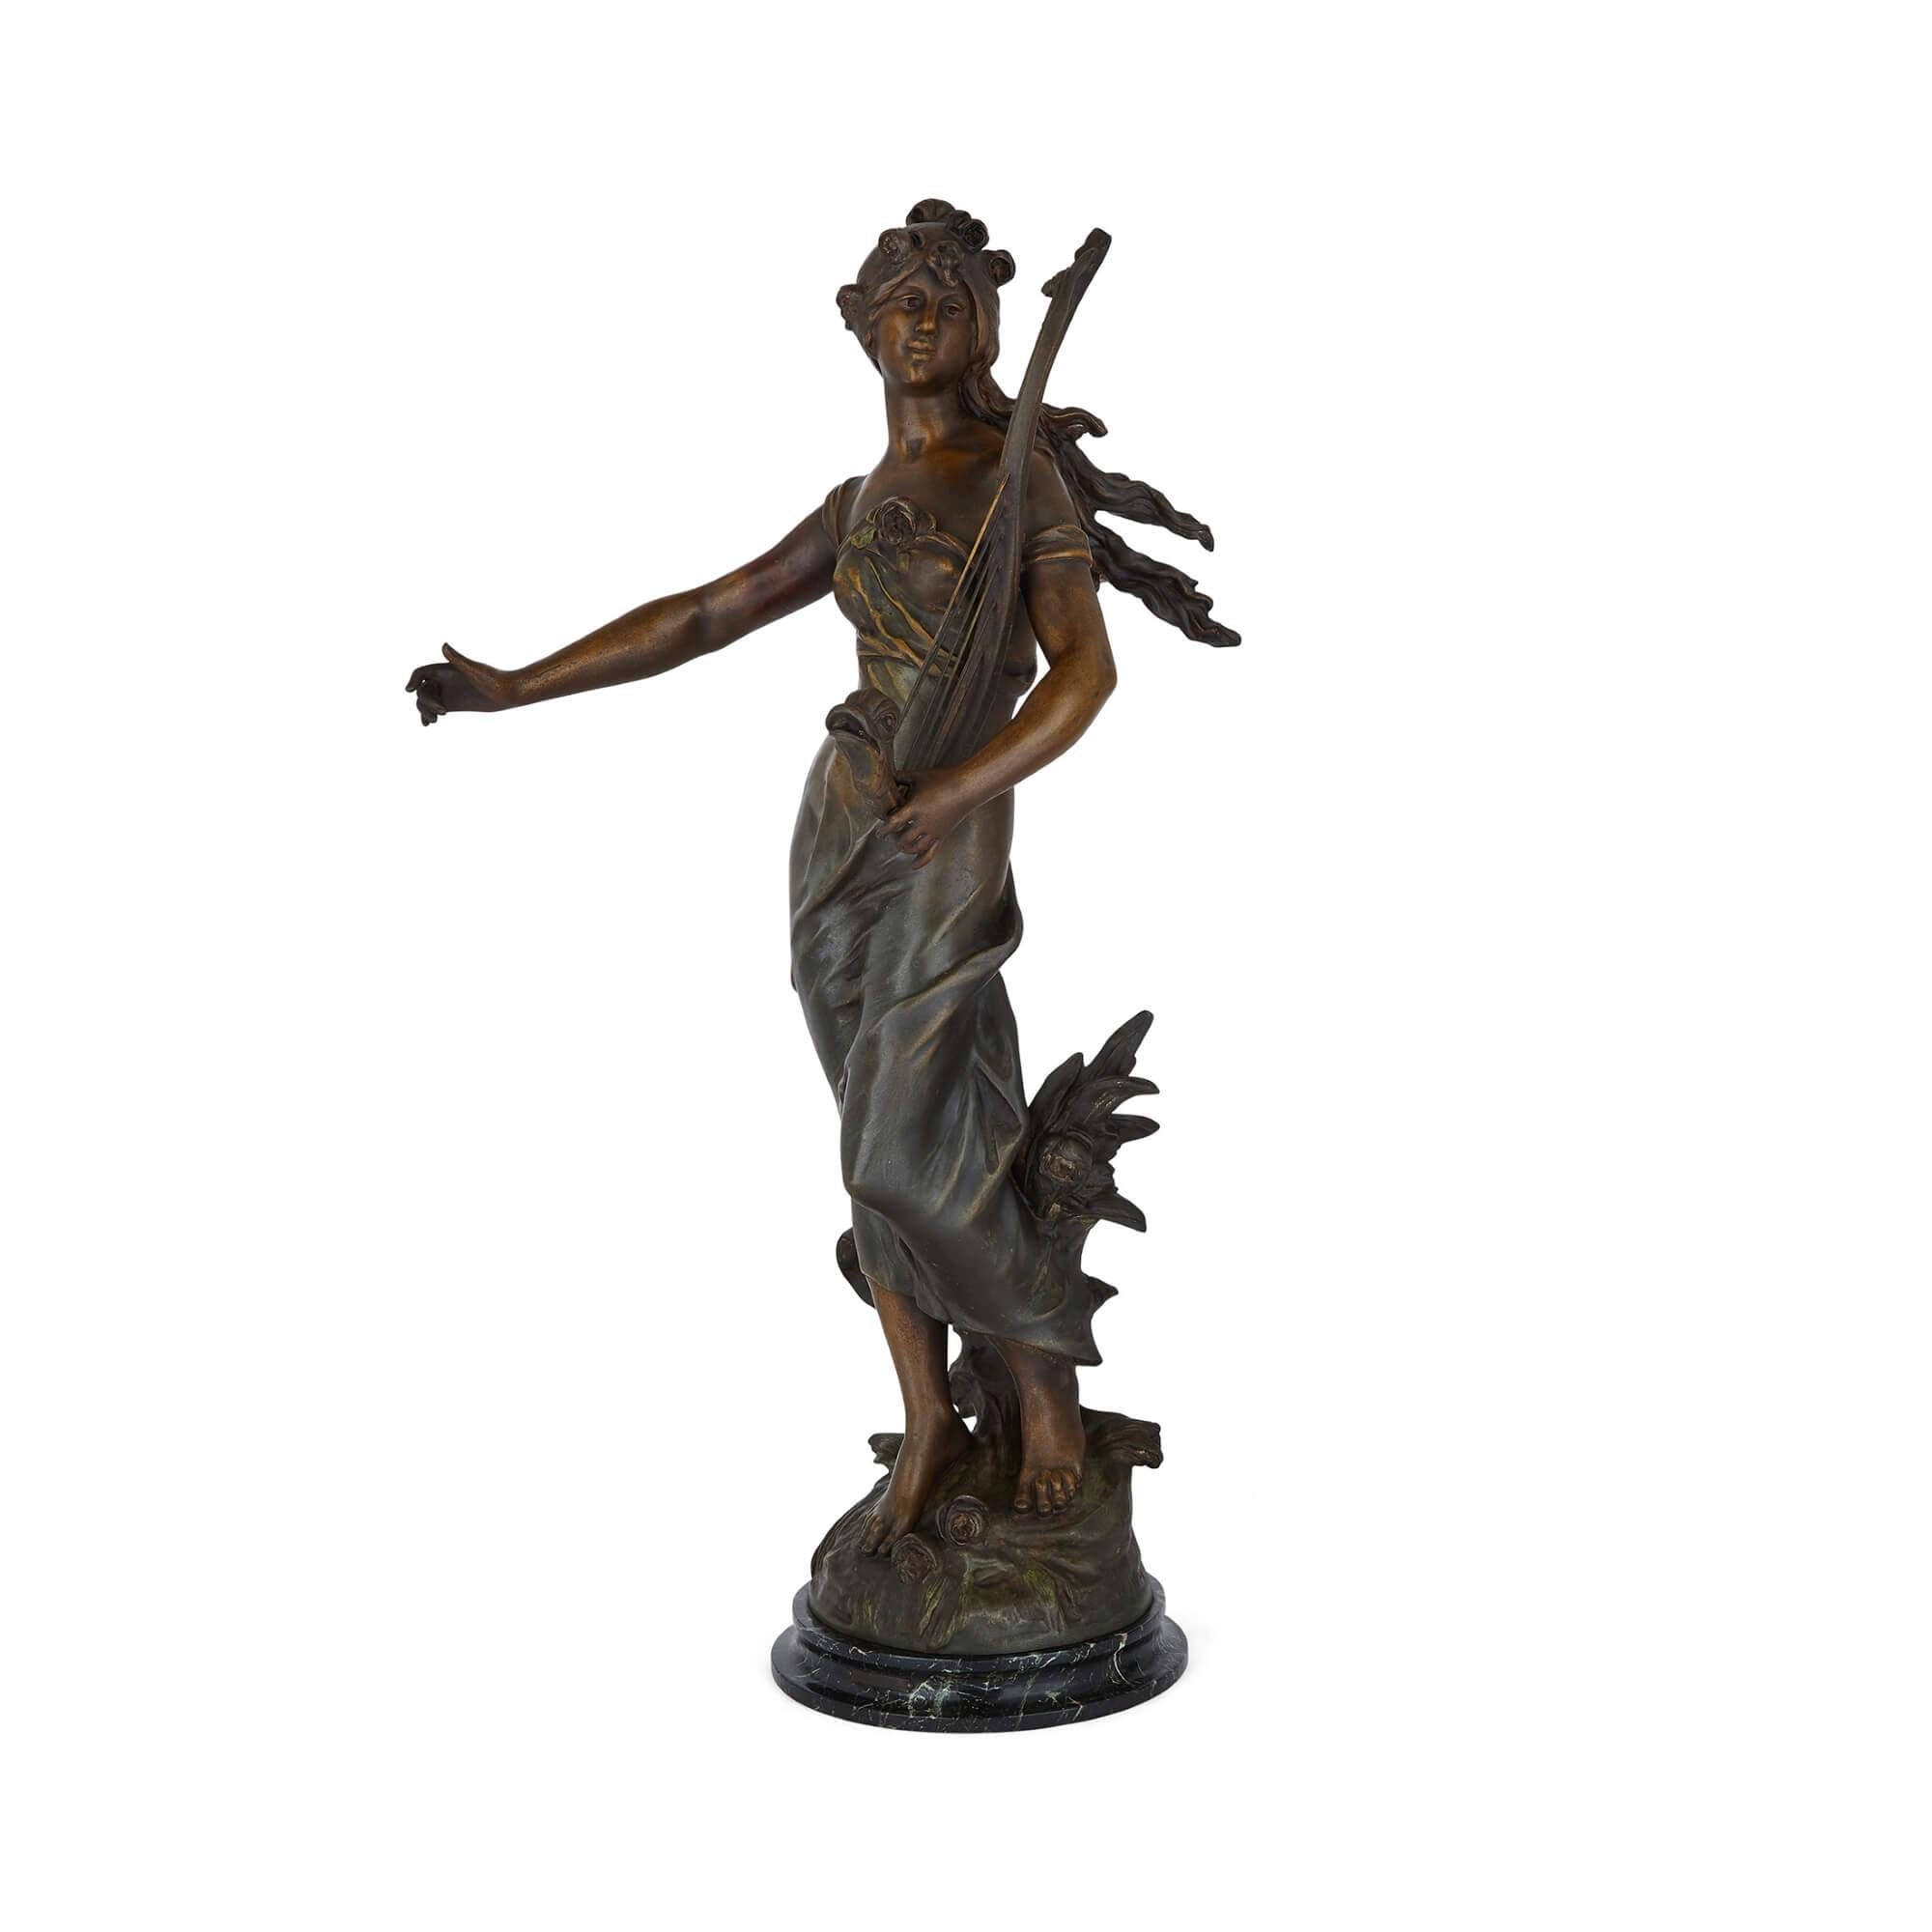 Pair of French Art Nouveau patinated spelter sculptures
French, early 20th century
Measures: Figure with lyre: Height 92cm, width 48cm, depth 38cm
Other figure: Height 90cm, width 52cm, depth 33cm

The spelter works in this pair are after two